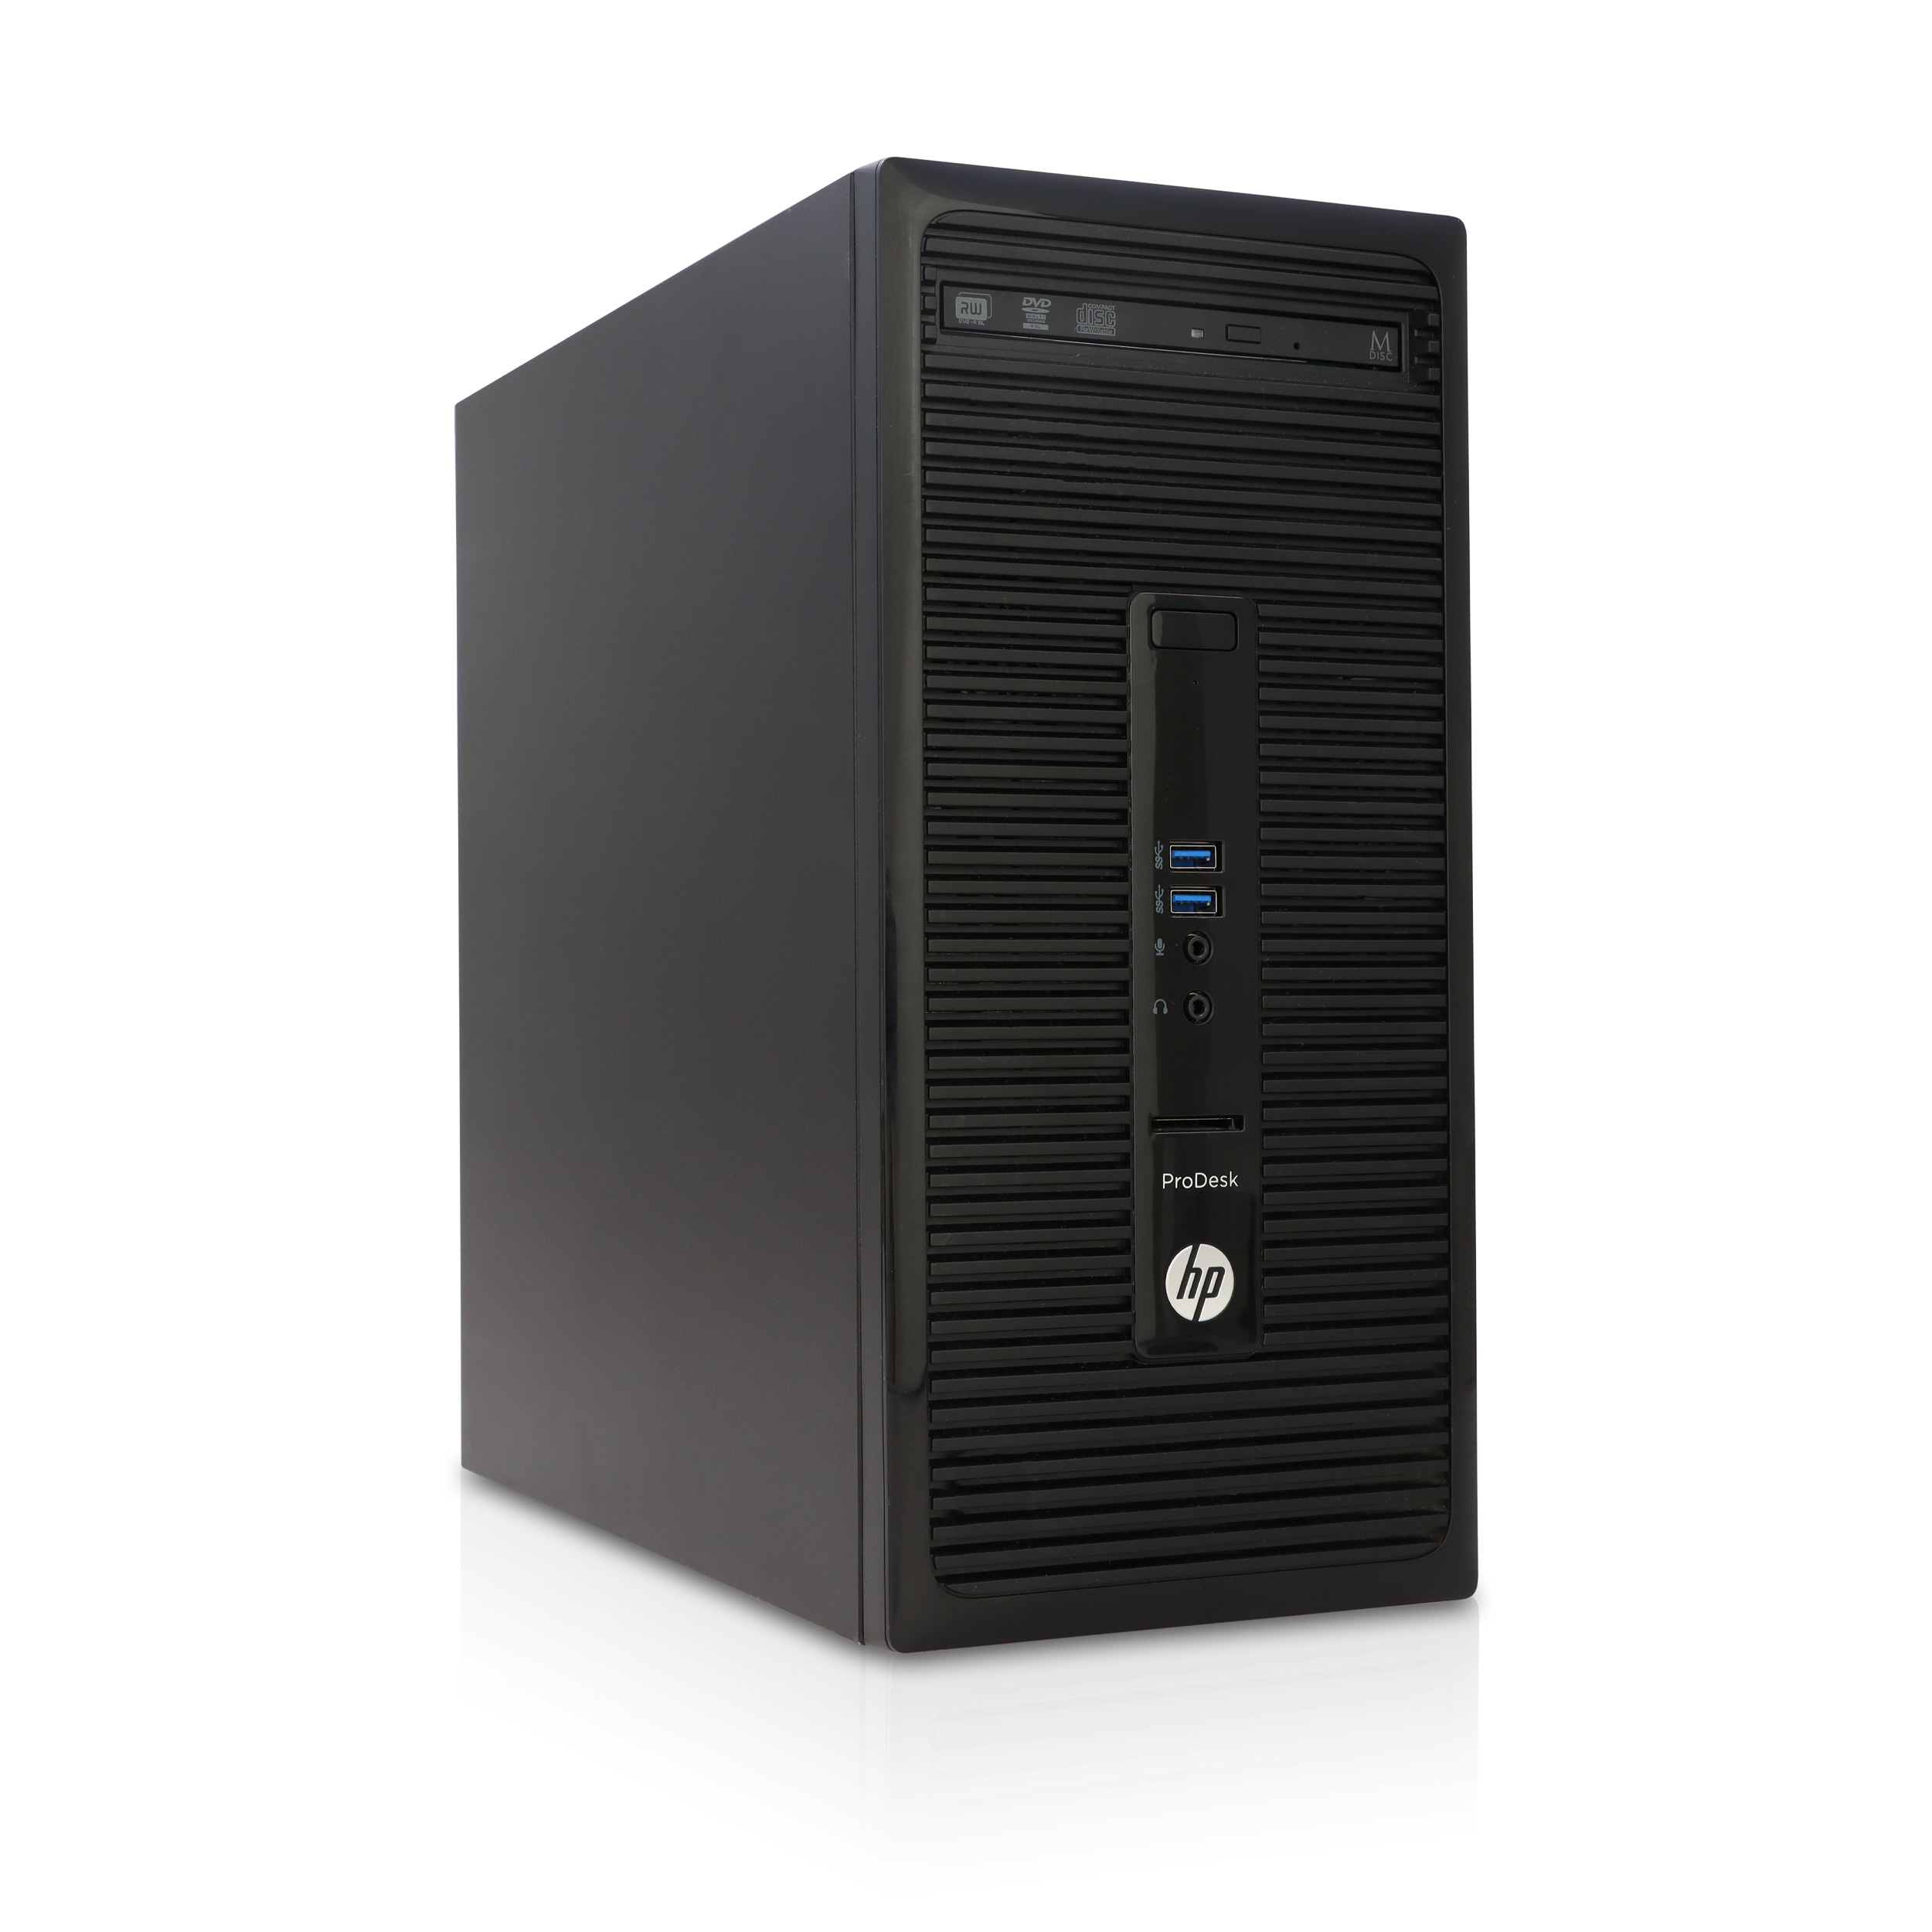 HP - HP ProDesk 490 G3 MT Business PC